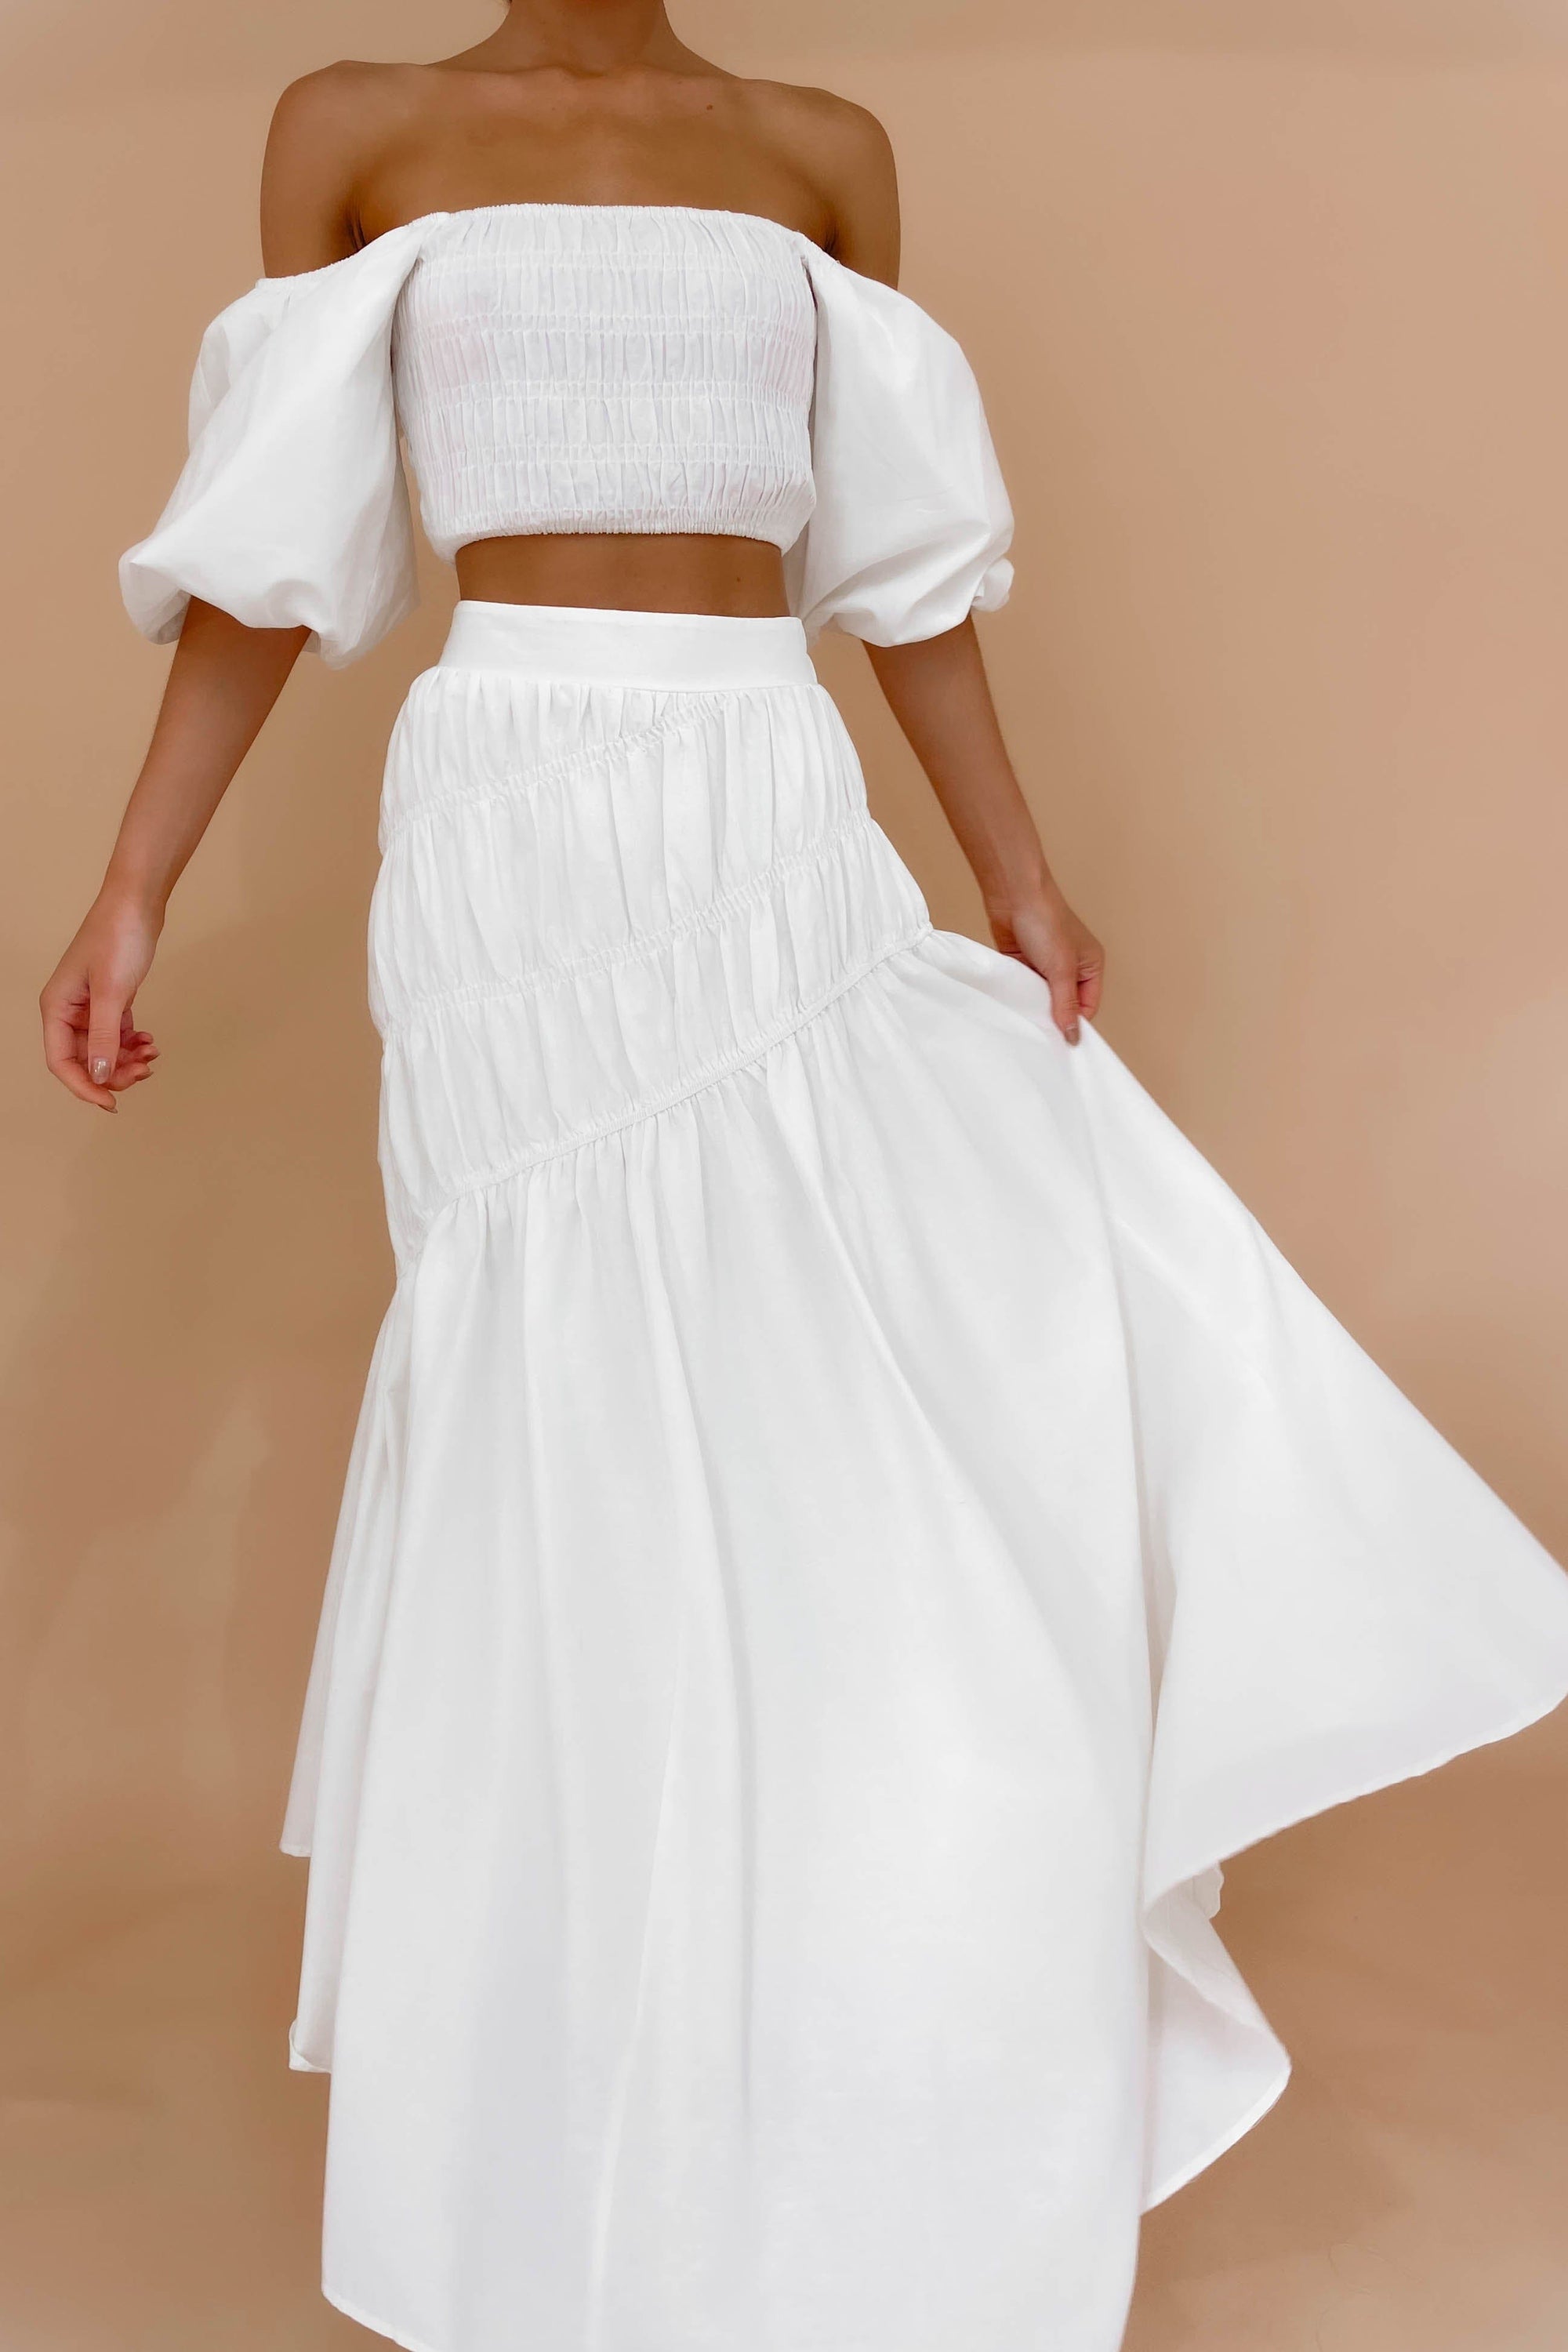 Celestie Skirt, BOTTOMS, COTTON & RAYON, COTTON AND RAYON, HIGH WAISTED, MAXI SKIRT, new arrivals, RAYON AND COTTON, SKIRT, SKIRTS, WHITE, , -MISHKAH